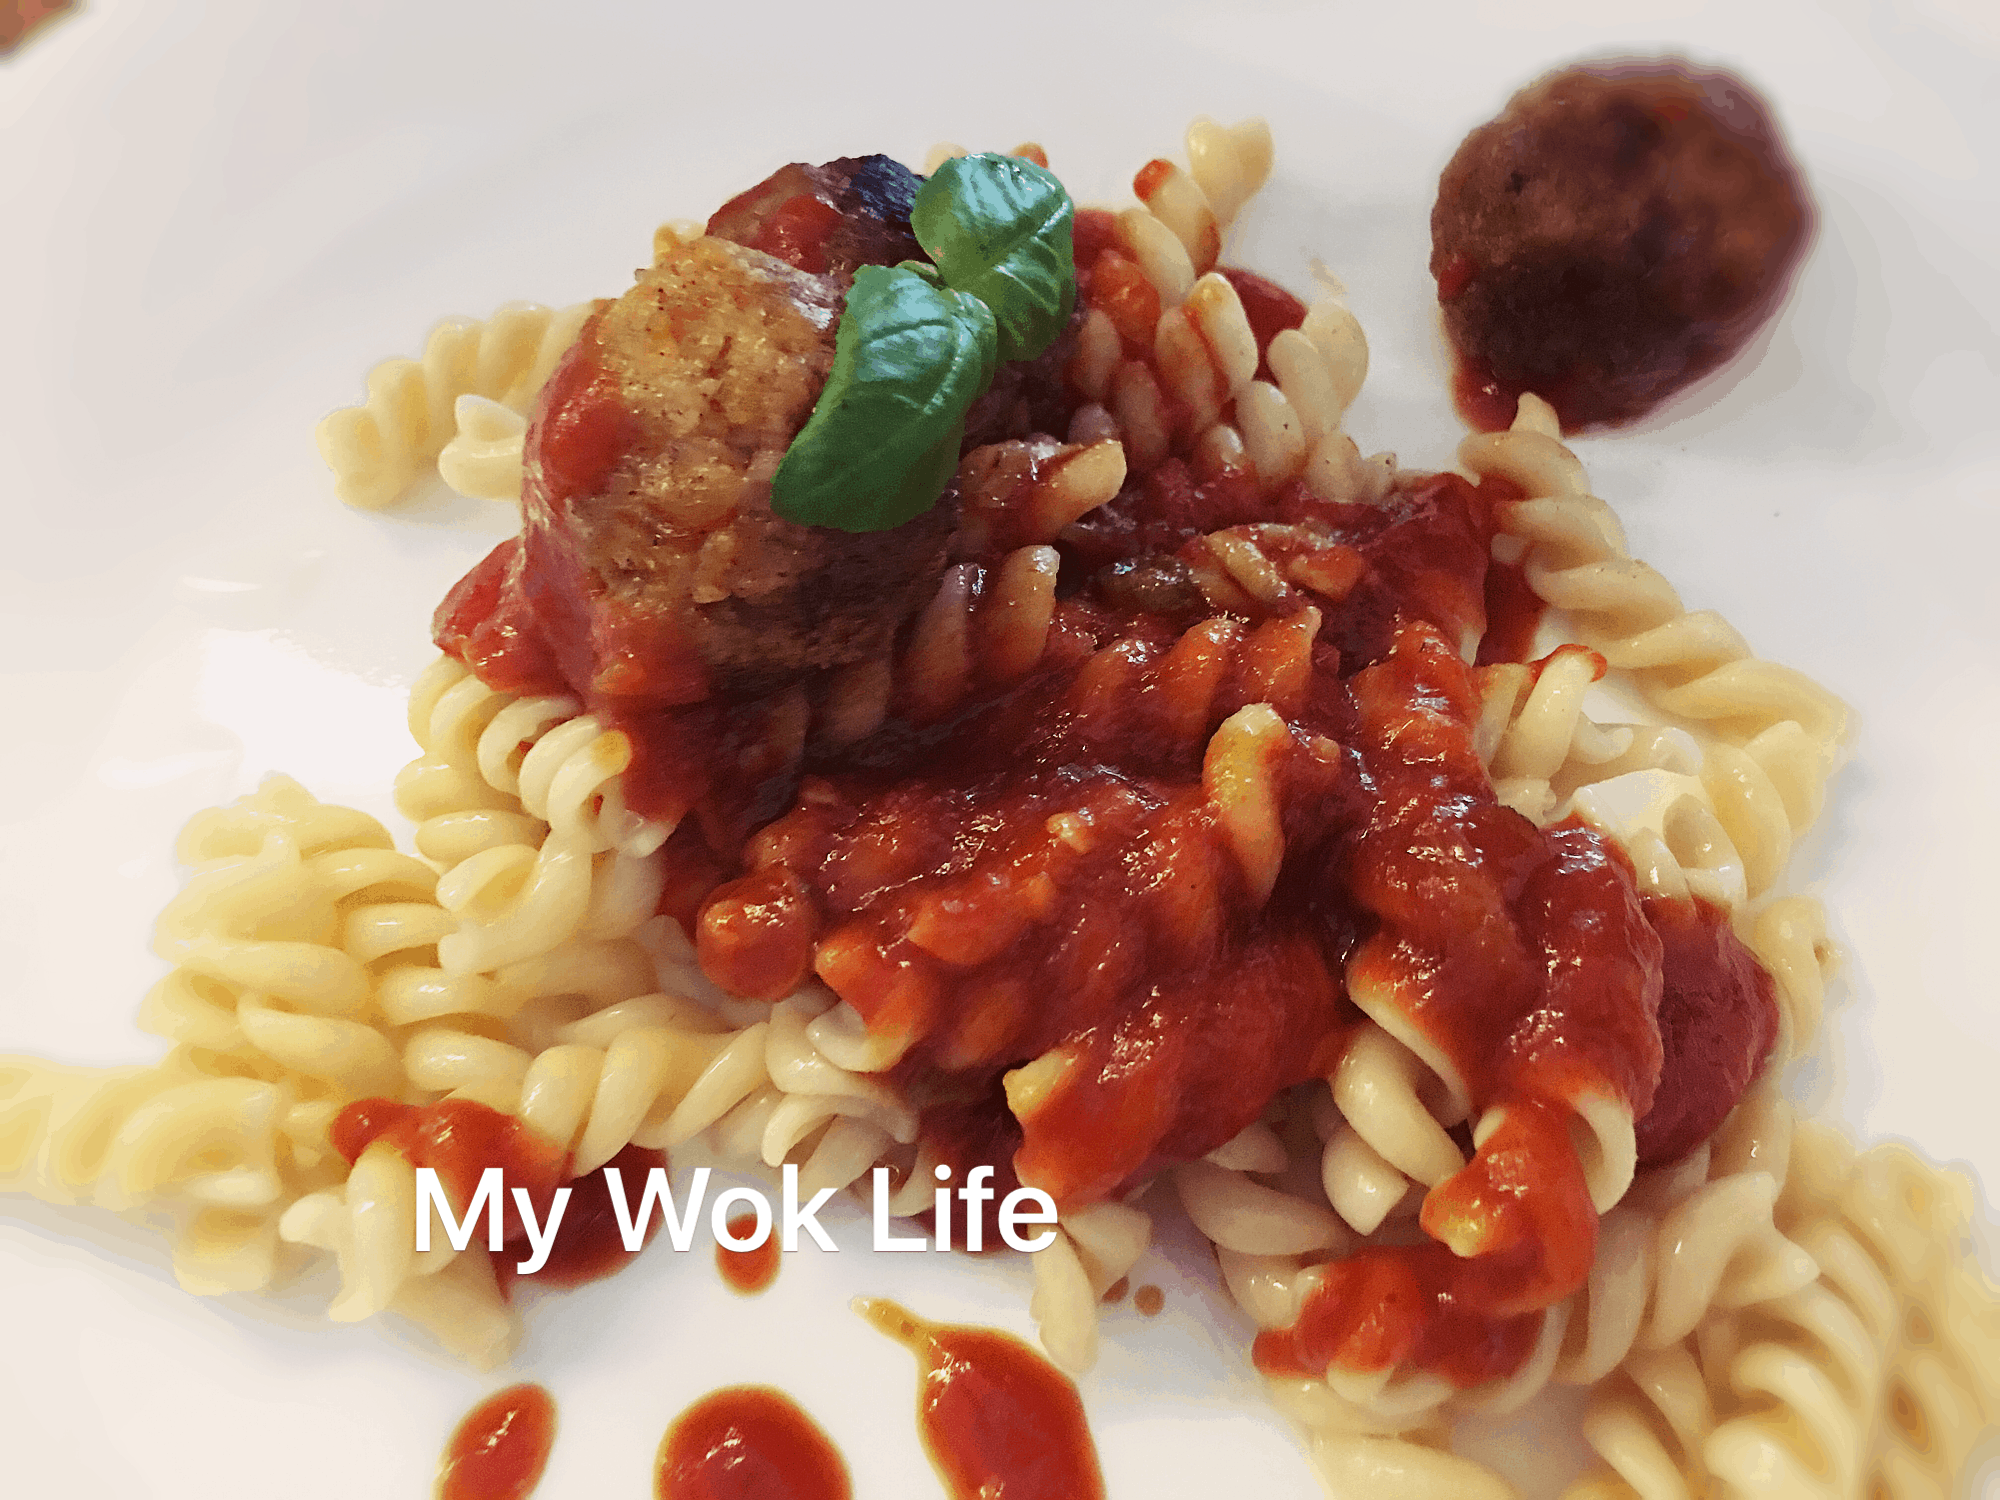 My Wok Life Cooking Blog Spicy Tomato Pasta with Tuna (Pork) Meatballs